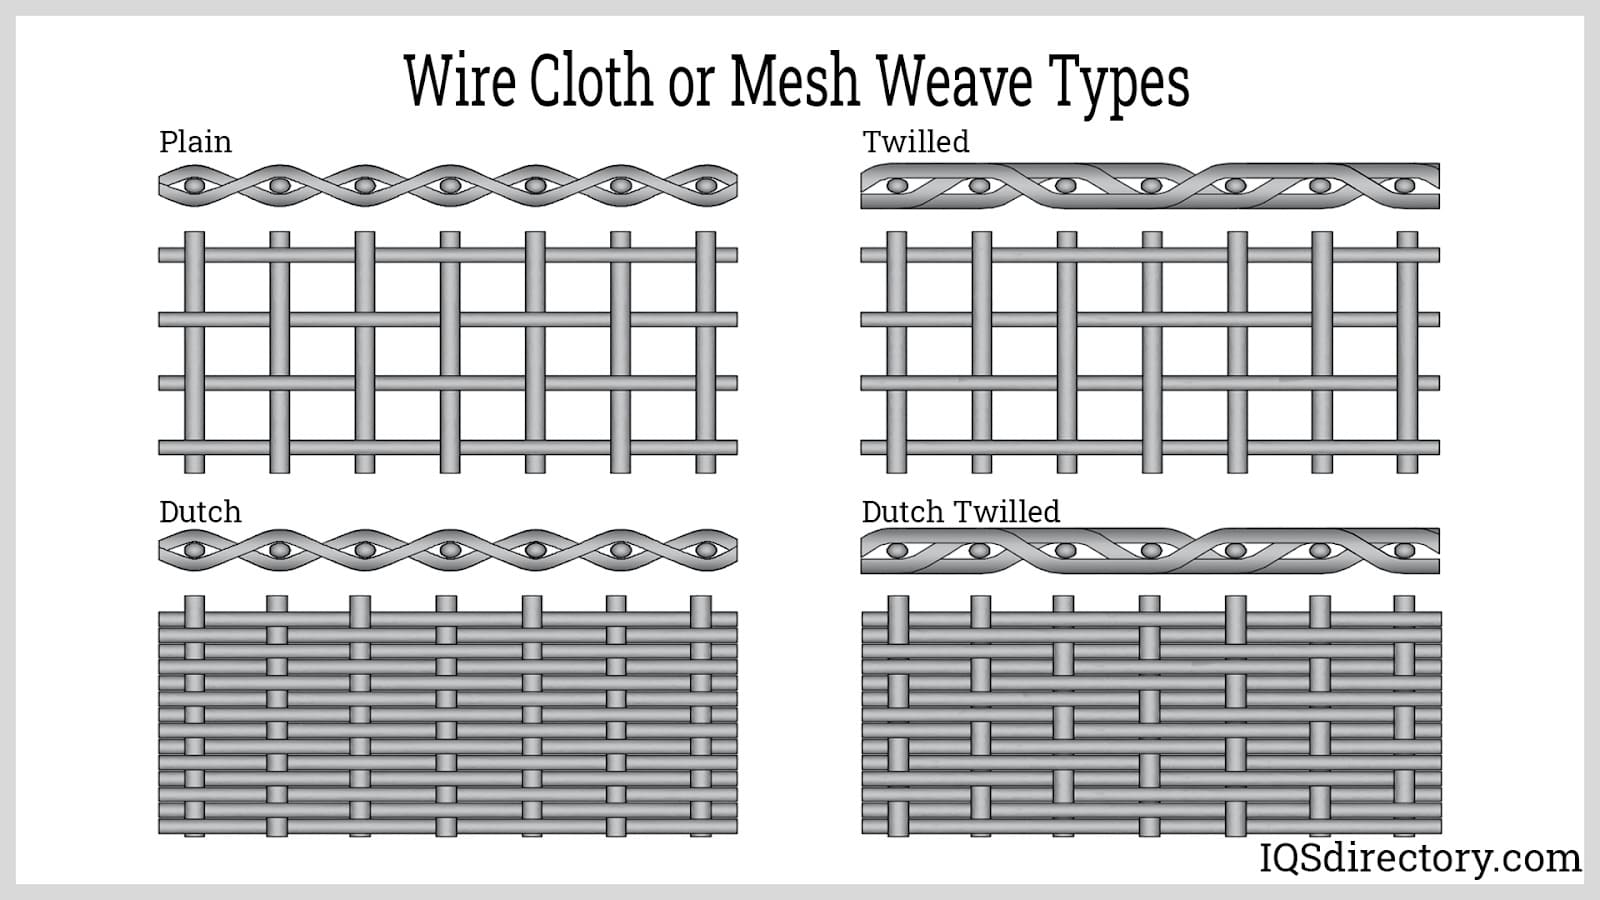 https://www.iqsdirectory.com/articles/wire-mesh/wire-cloth/wire-cloth-mesh-weave-types.jpg